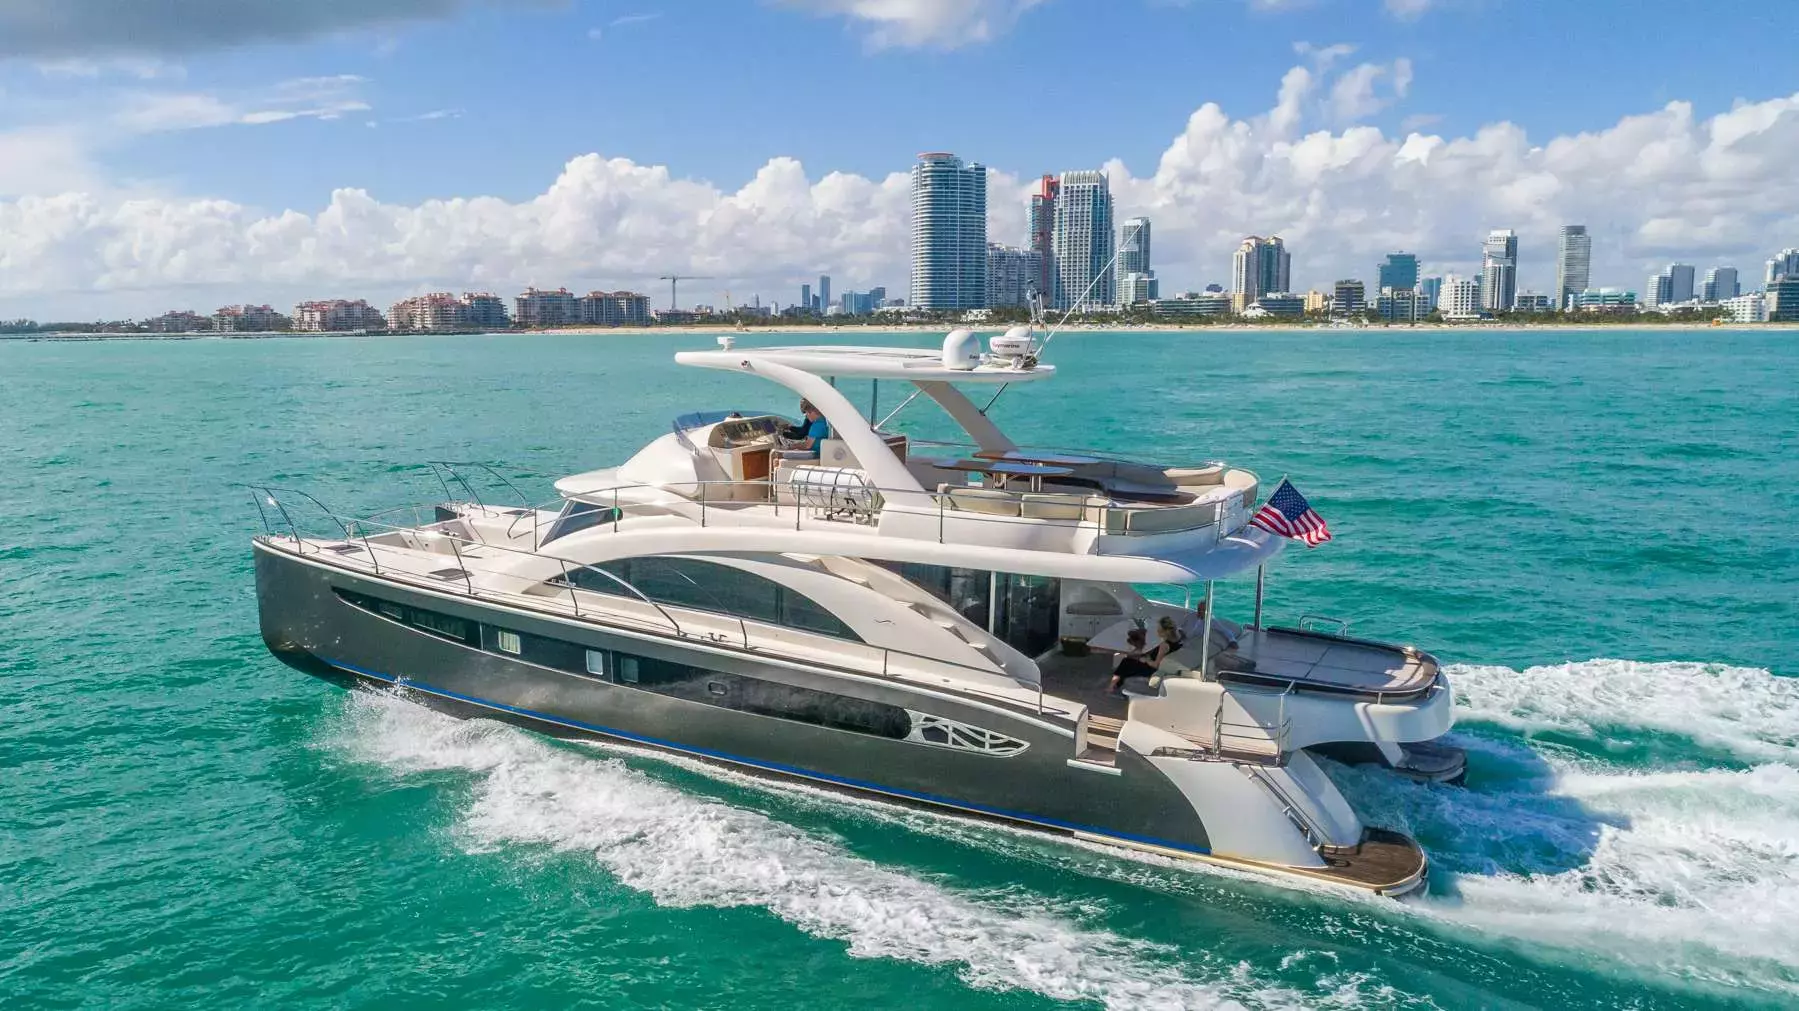 Legend & Soul by Rodriguez Yachts - Top rates for a Rental of a private Power Catamaran in Bahamas